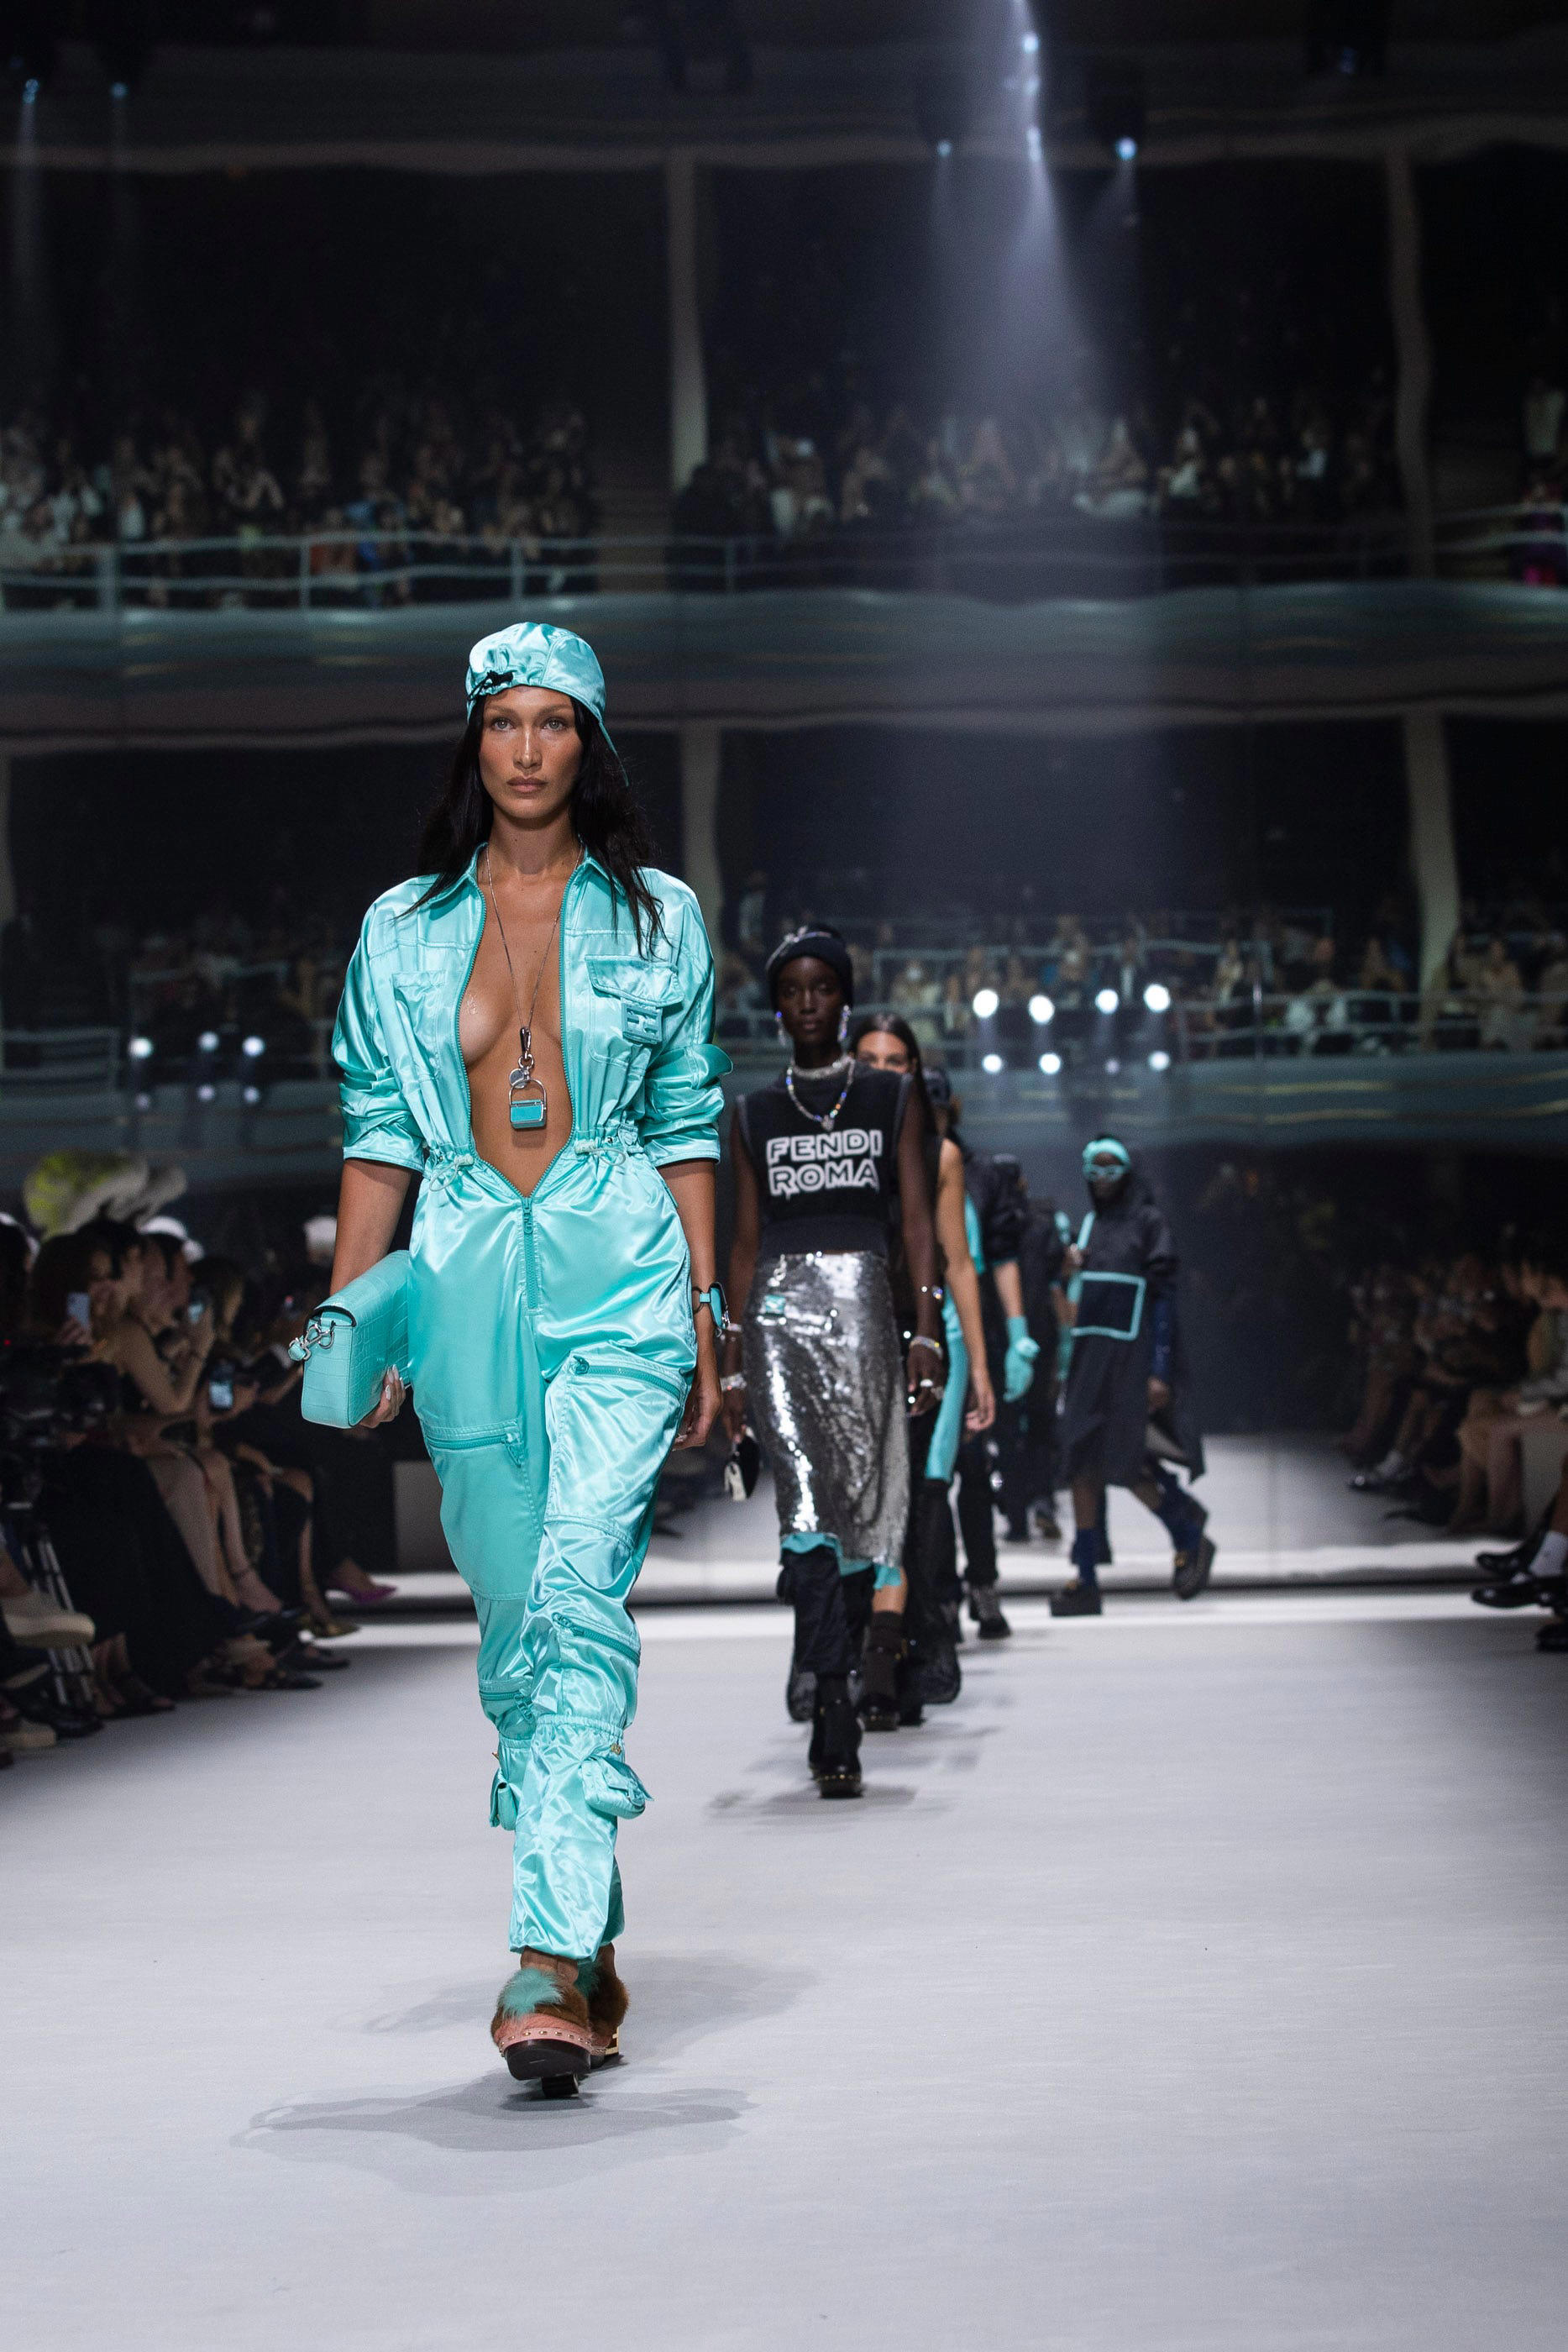 New York Fashion Week 2024 See schedule, designers, dates, more about